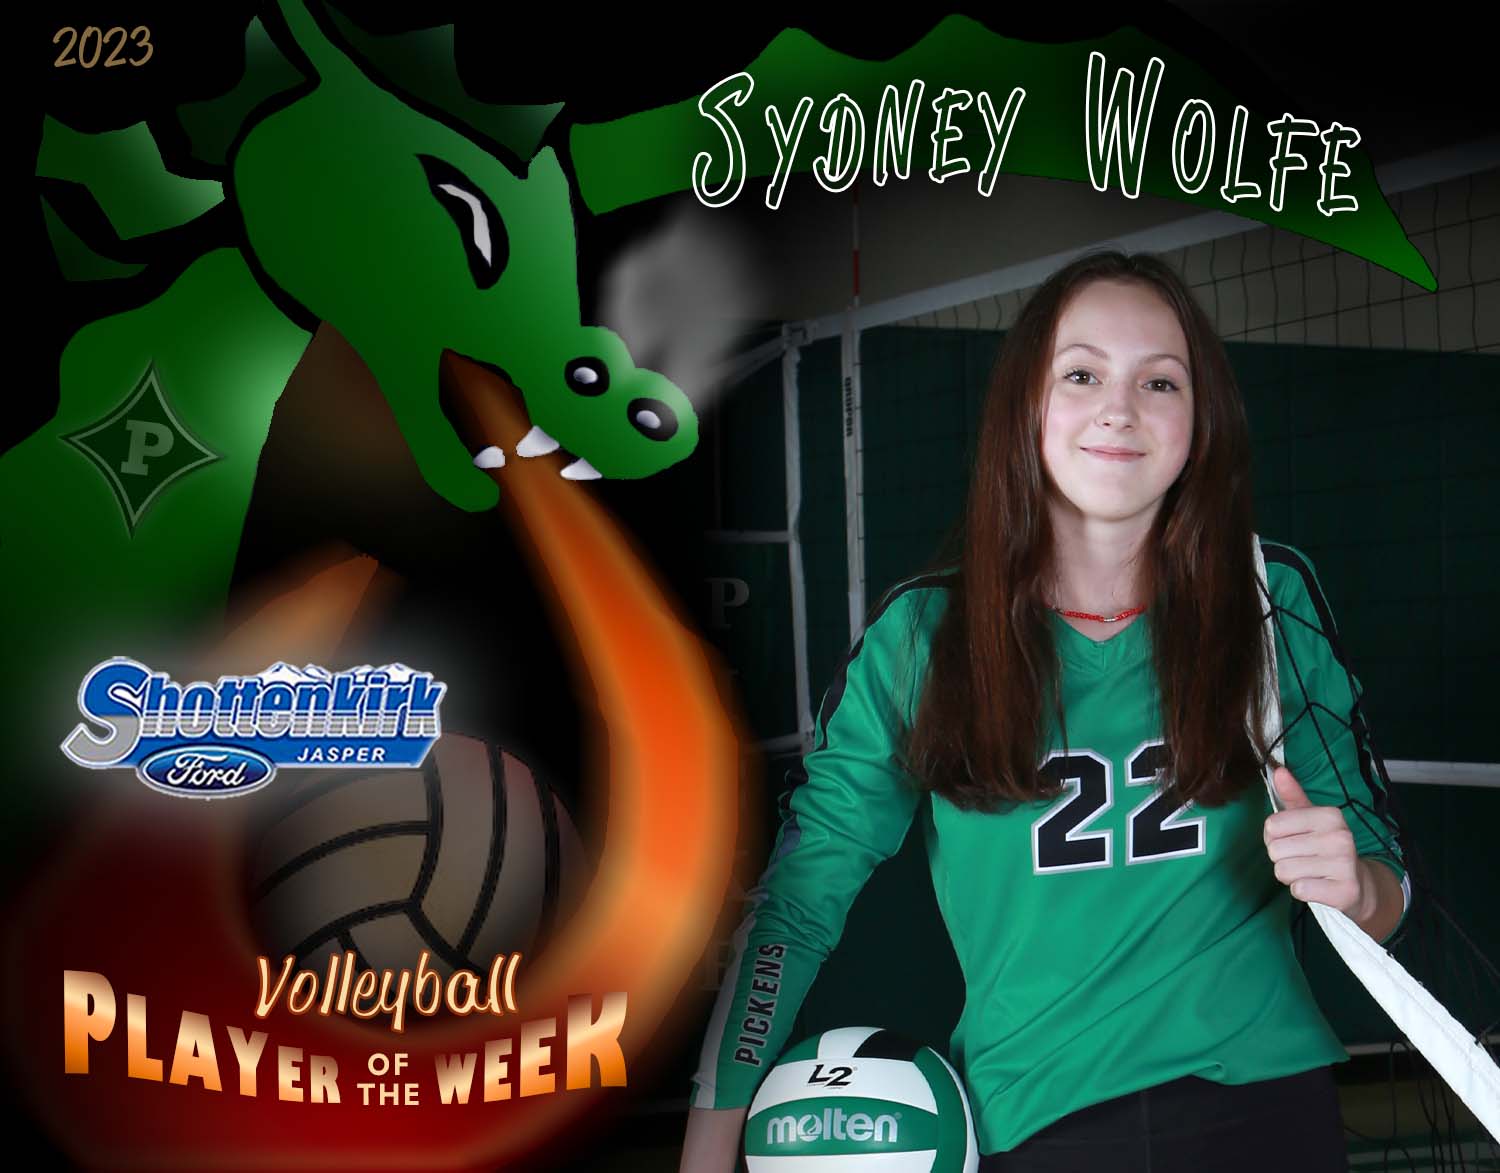 PHS Volleyball Player of the Week #3 - Sydney Wolfe